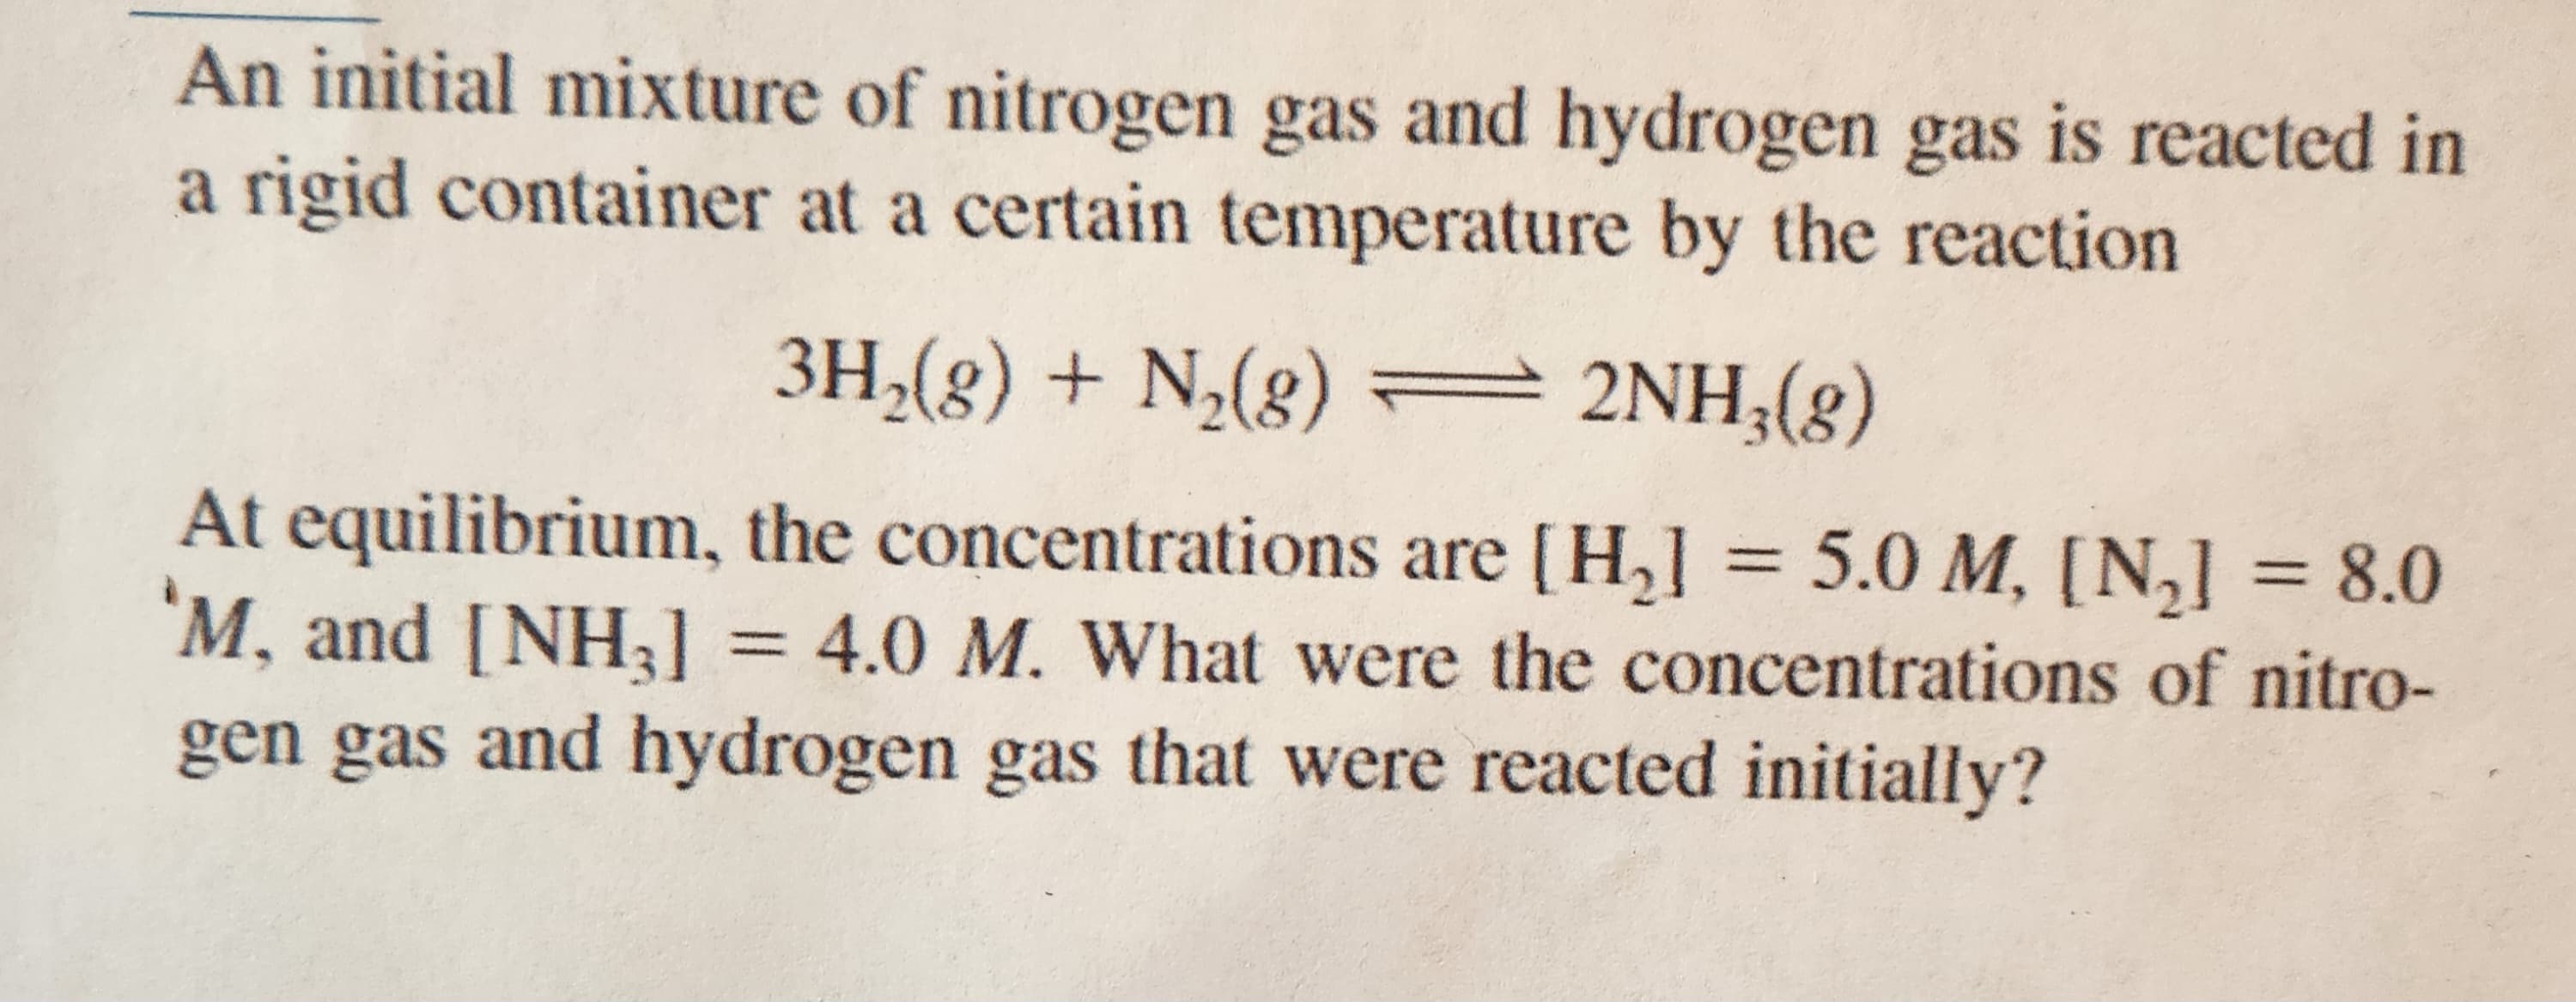 An initial mixture of nitrogen gas and hydrogen gas is reacted in
a rigid container at a certain temperature by the reaction
3H₂(g) + N₂(g) — 2NH₂(g)
=
At equilibrium, the concentrations are [H₂] = 5.0 M, [N₂] = 8.0
'M, and [NH3] = 4.0 M. What were the concentrations of nitro-
gen gas and hydrogen gas that were reacted initially?